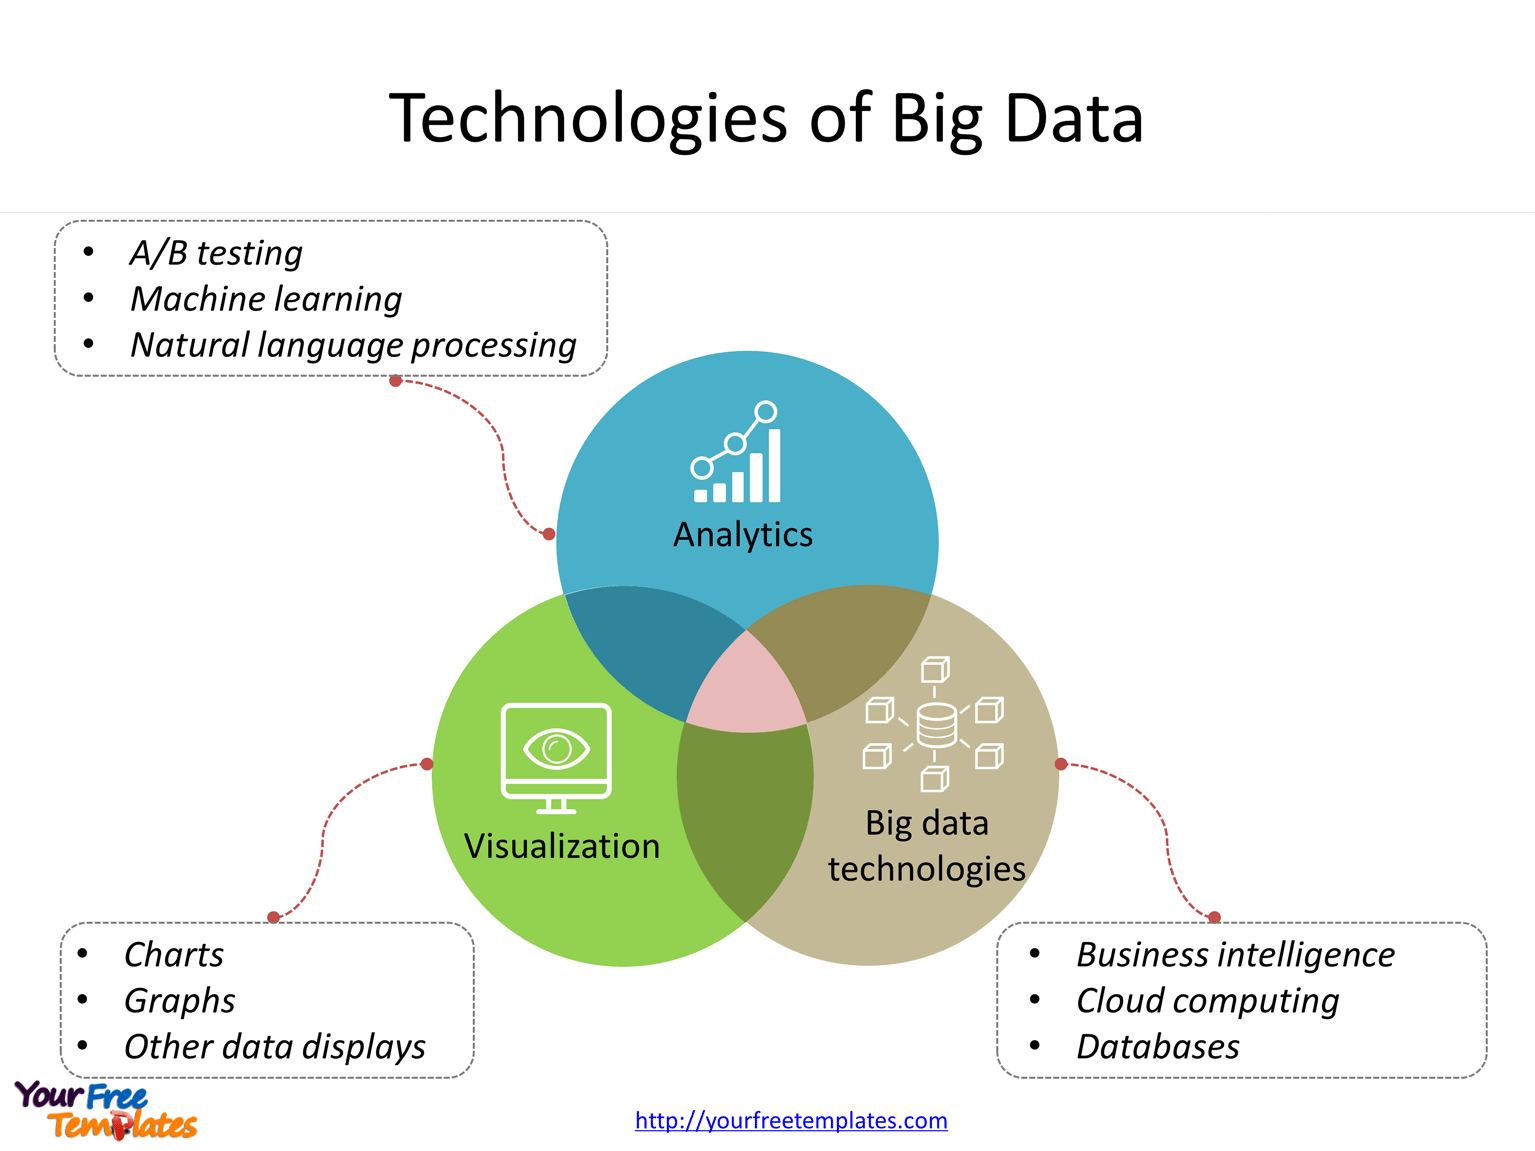 5C Architecture of Big Data for Manufacturing Applications diagram